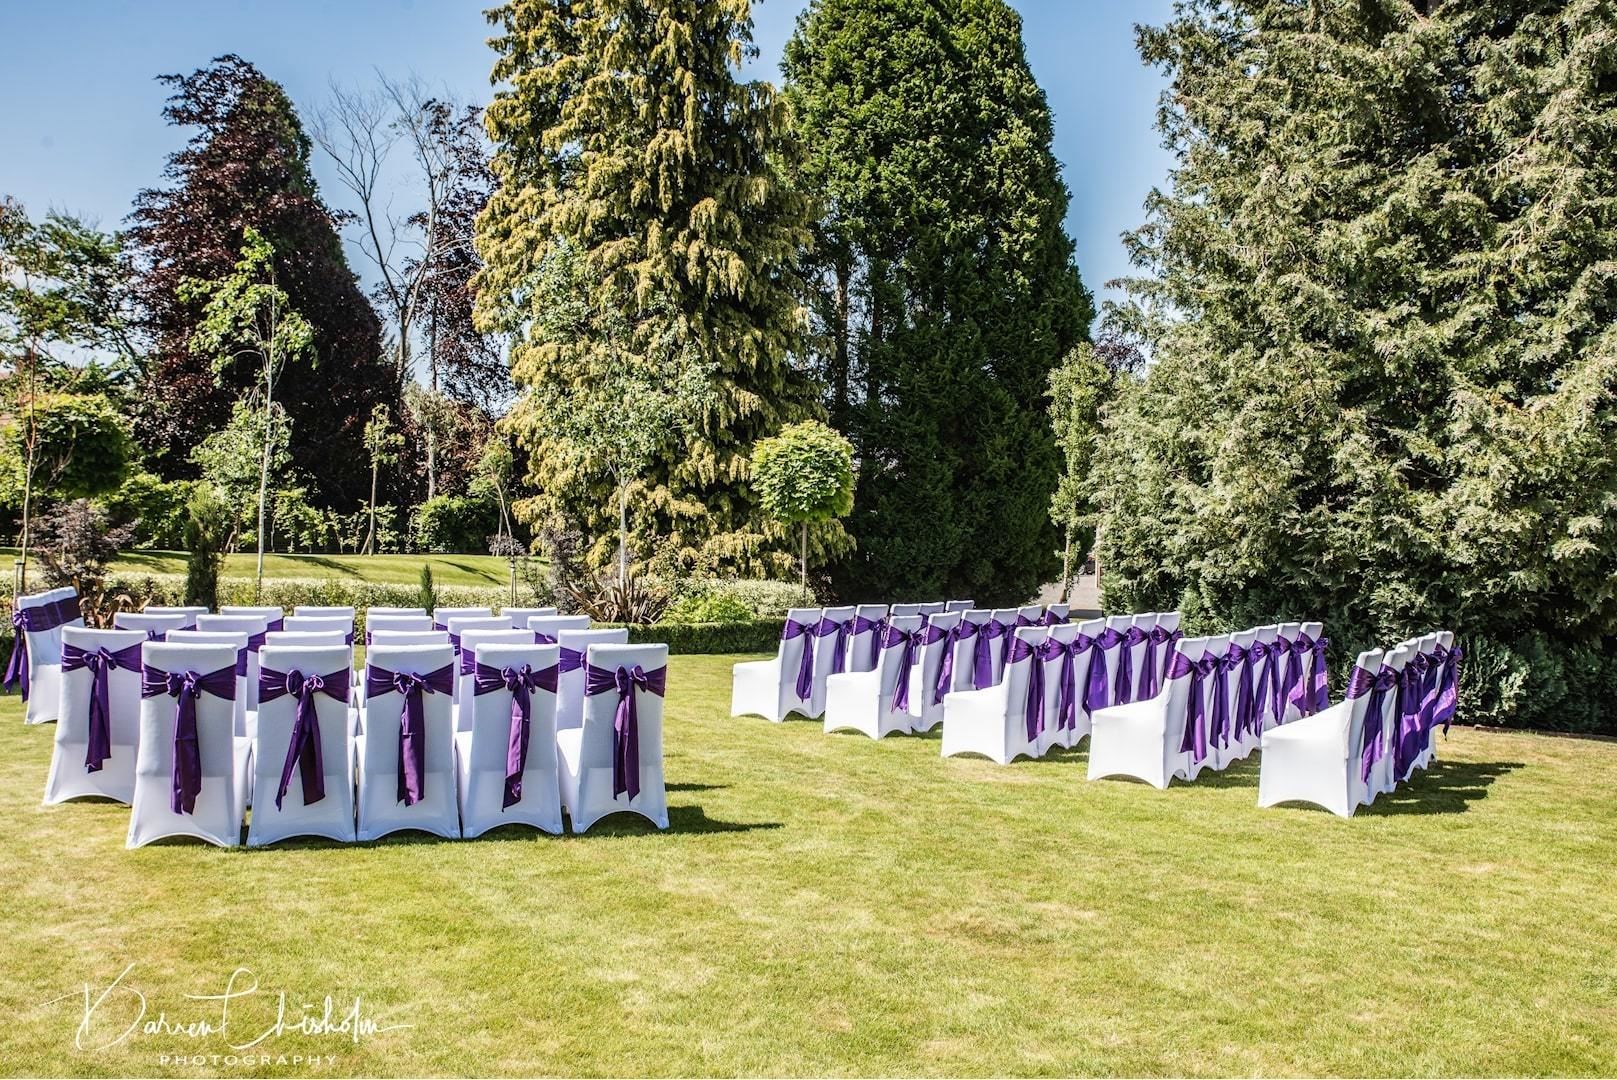 Enjoy an outdoors ceremony in the lush gardens.